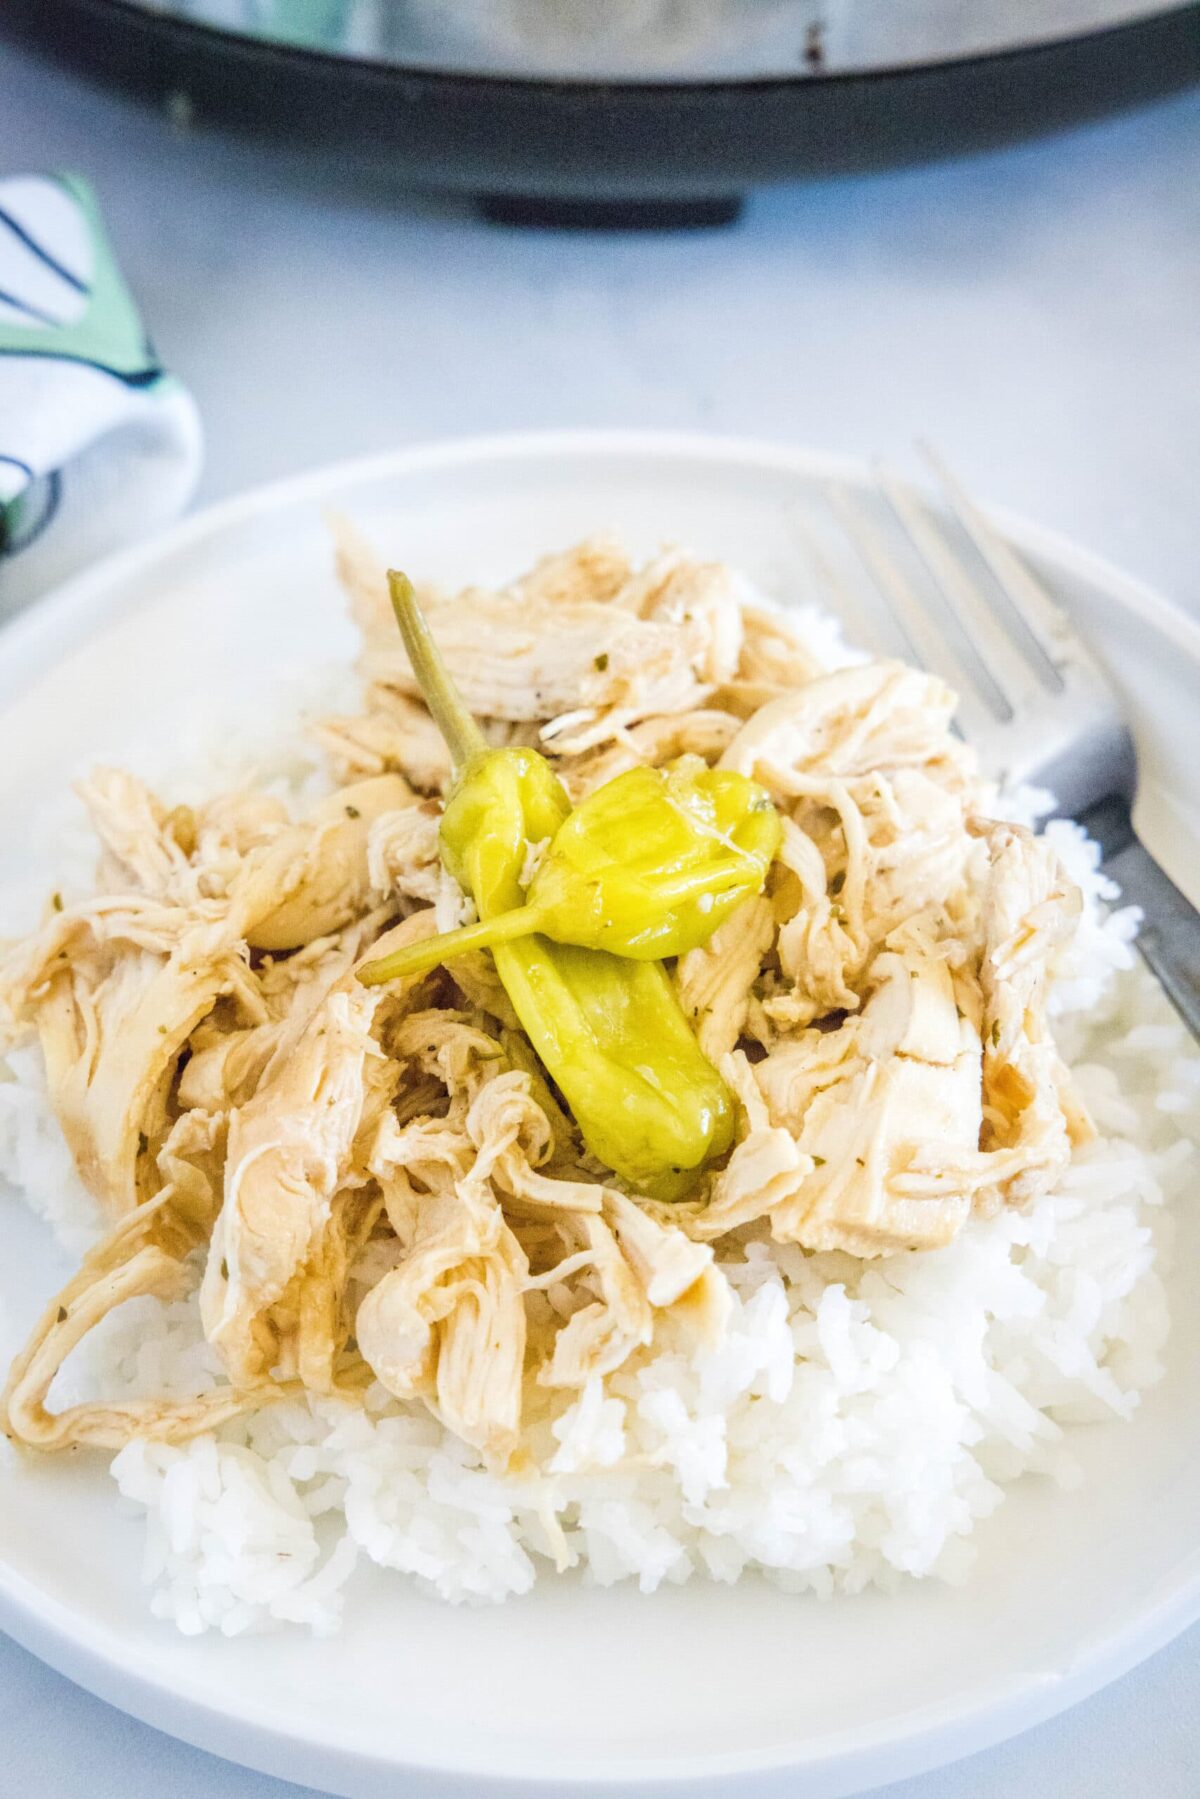 A plate with a fork and a bed of rice, topped with shredded chicken and pepperoncini peppers